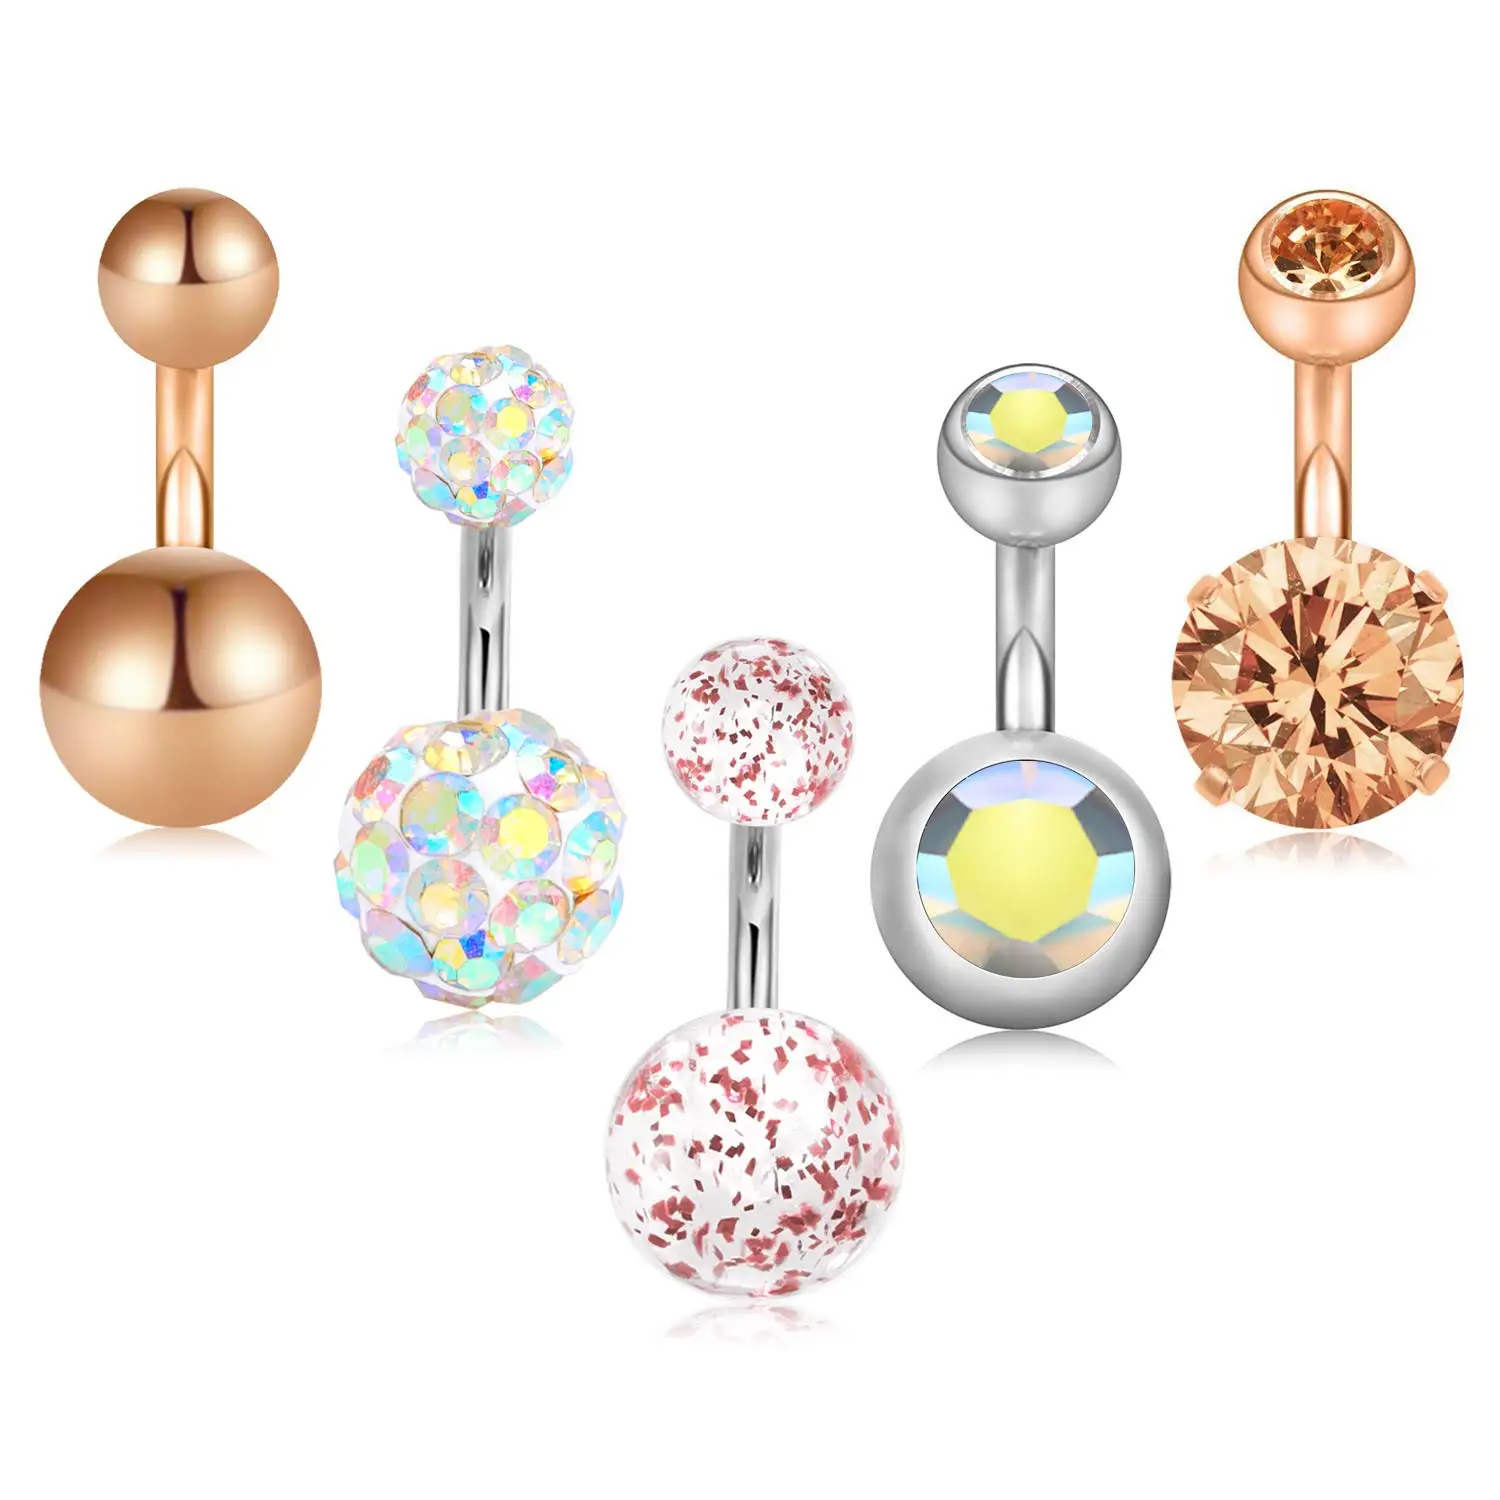 5 Pcs/lot Barbell Coating Belly Button Rings Body Piercing Jewelry Women Gift 